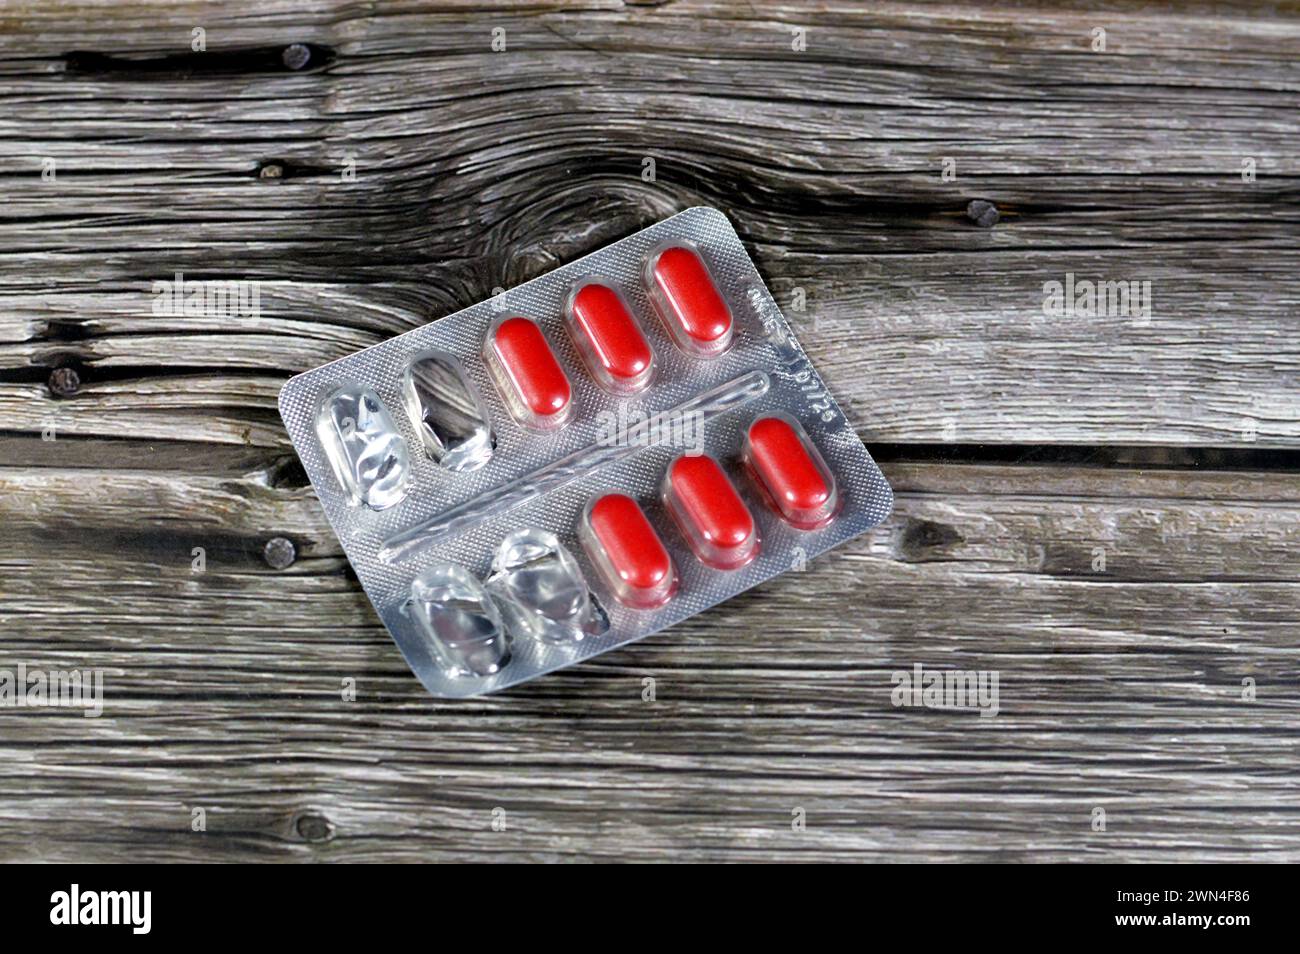 Medication tablets, red tablets, treatment, remedy, drug usage, abuse, prescription concept, painkillers and antibiotics, analgesics, taking a medicat Stock Photo